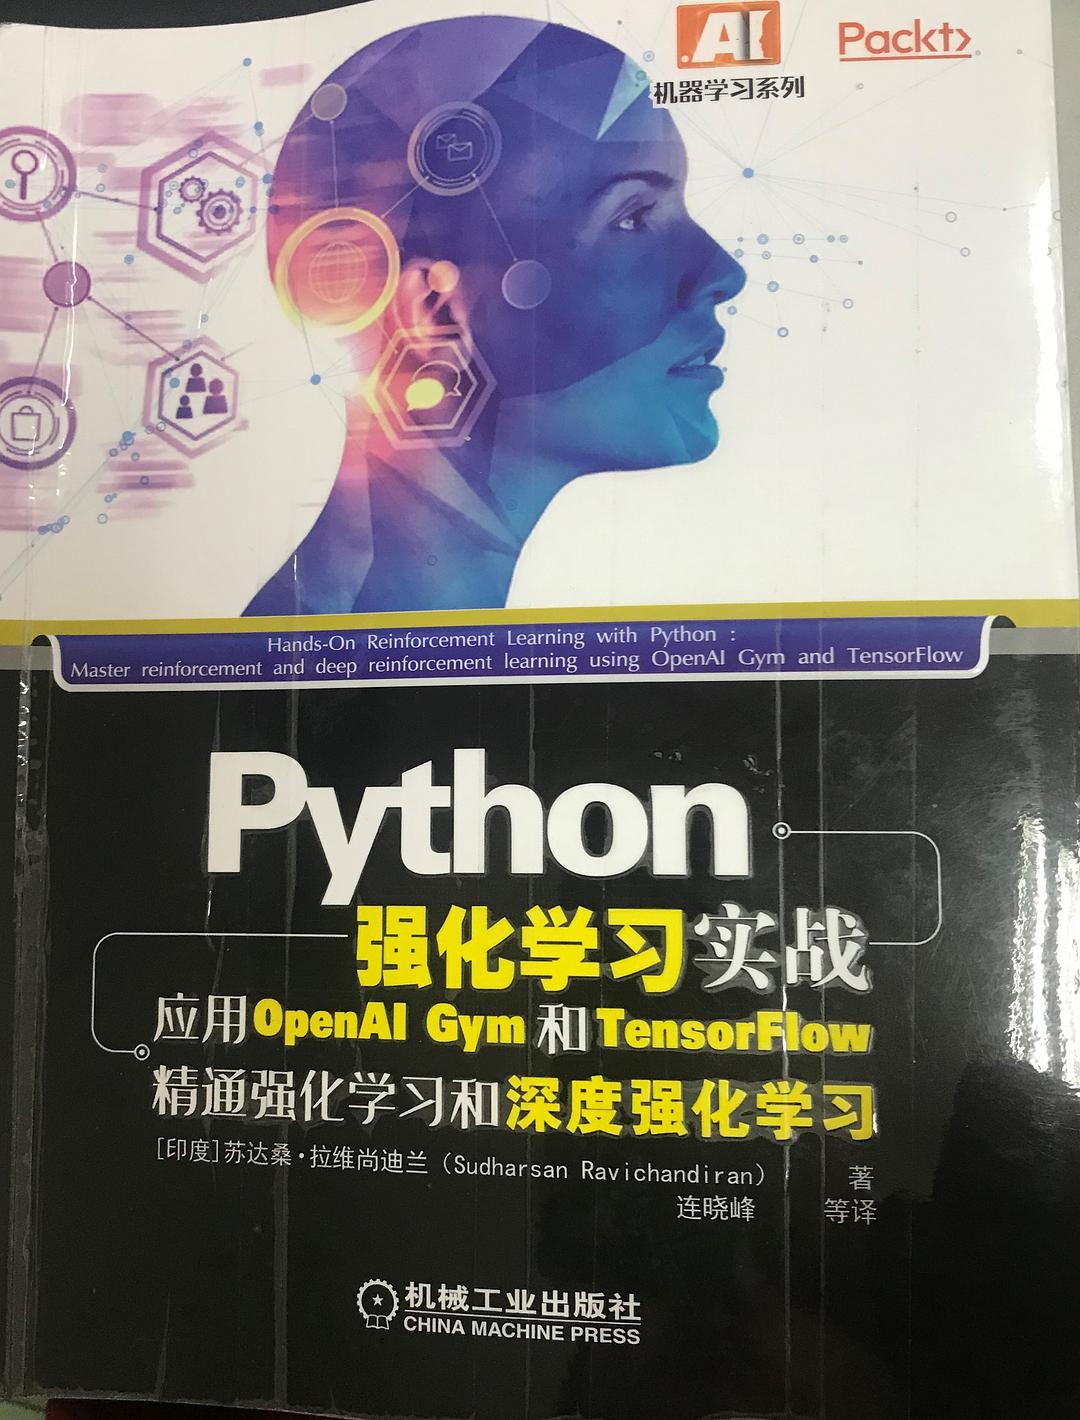 Python强化学习实战 应用OpenAI Gym和TensorFlow精通强化学习和深度强化学习 master reinforcement and deep reinforcement learning using OpenAl Gym and TensorFlow